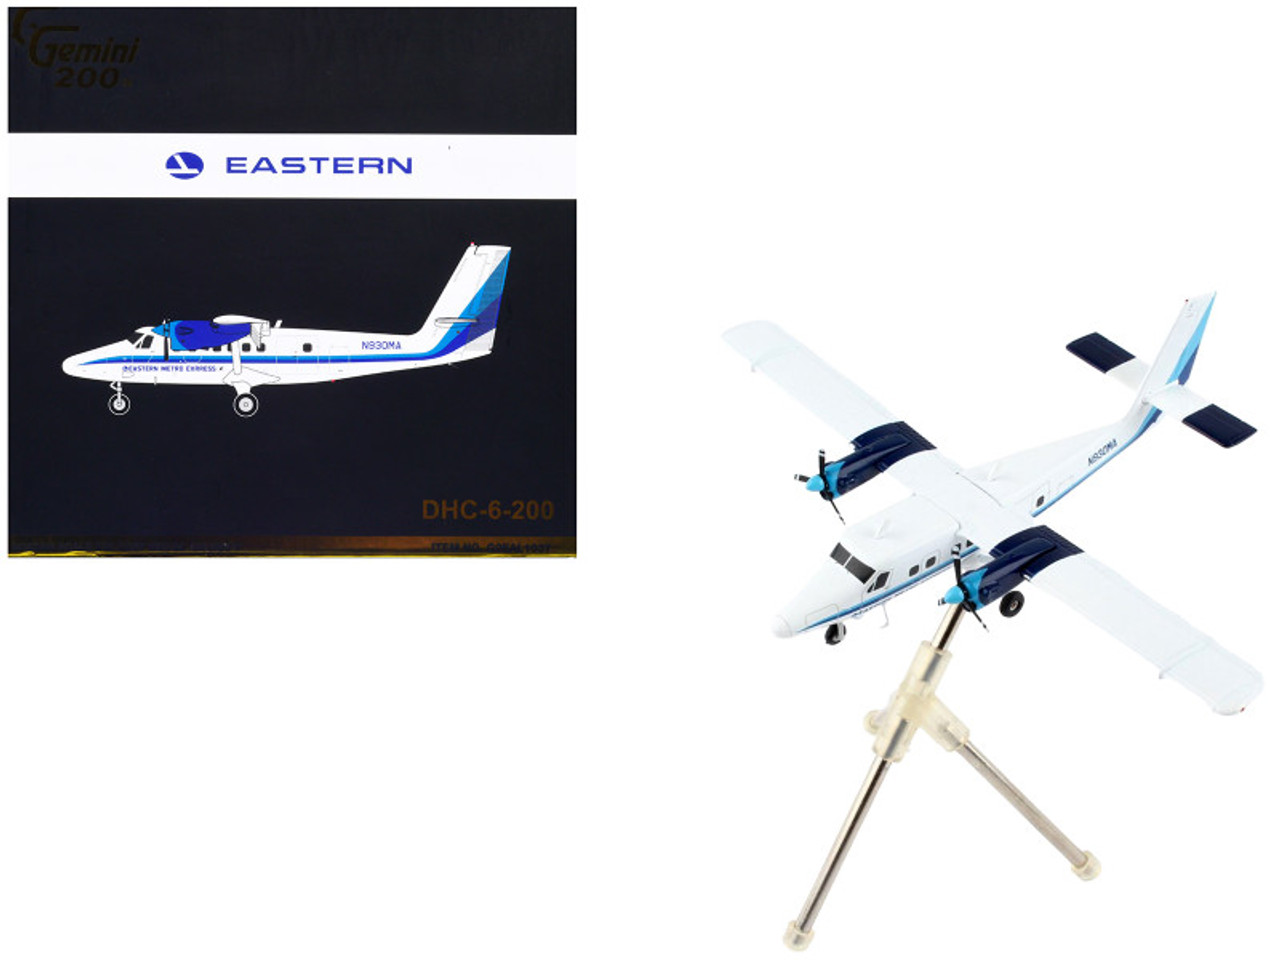 De Havilland DHC-6-200 Commercial Aircraft "Eastern Air Lines - Metro Express" White with Blue Stripes "Gemini 200" Series 1/200 Diecast Model Airplane by GeminiJets